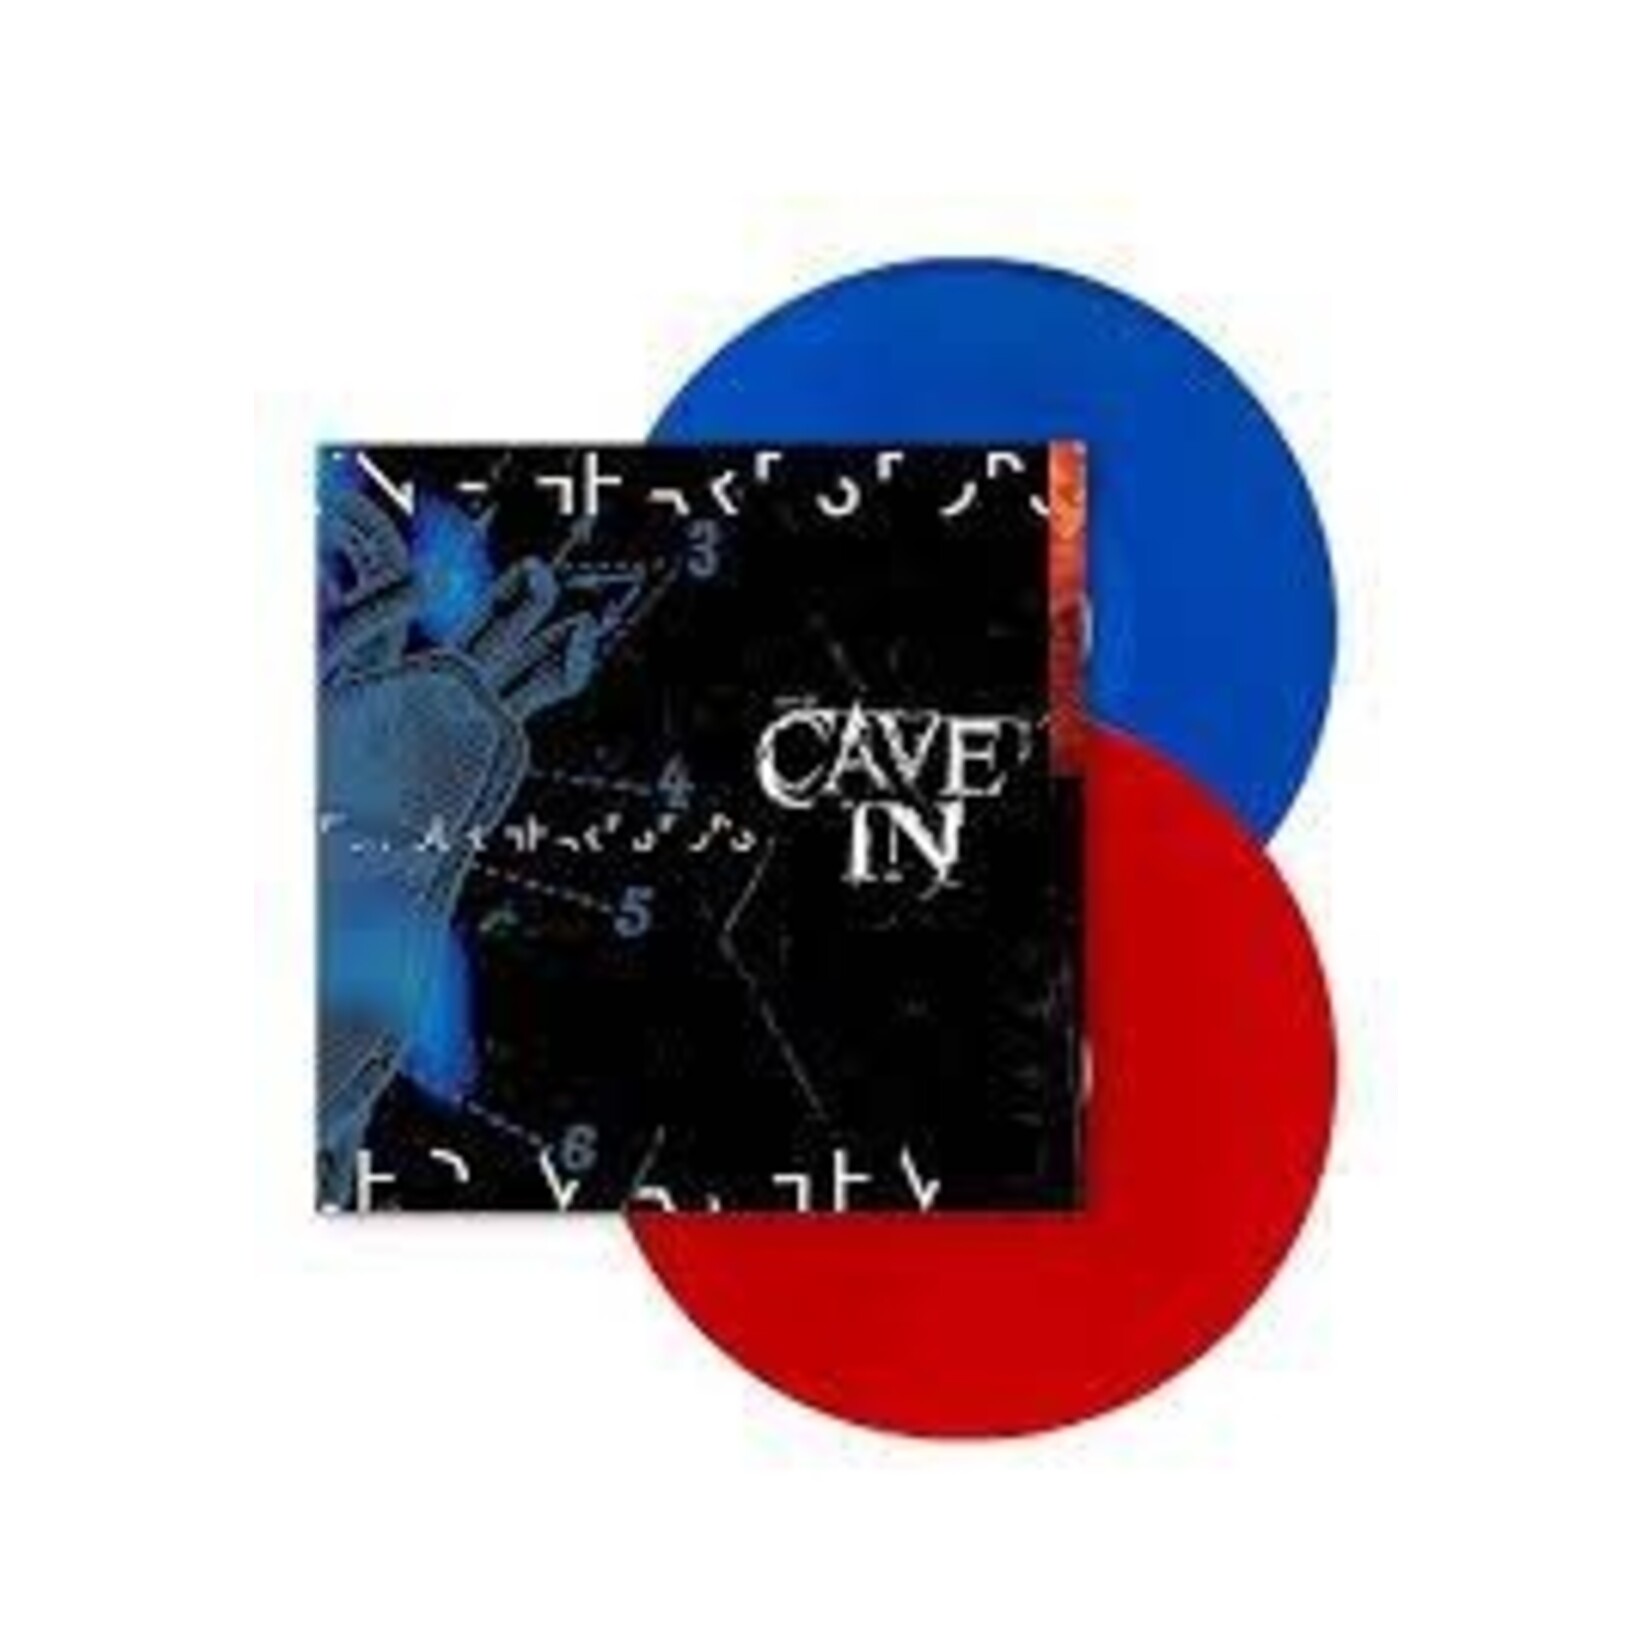 New] Cave In - Until Your Heart Stops (2LP, red & blue vinyl